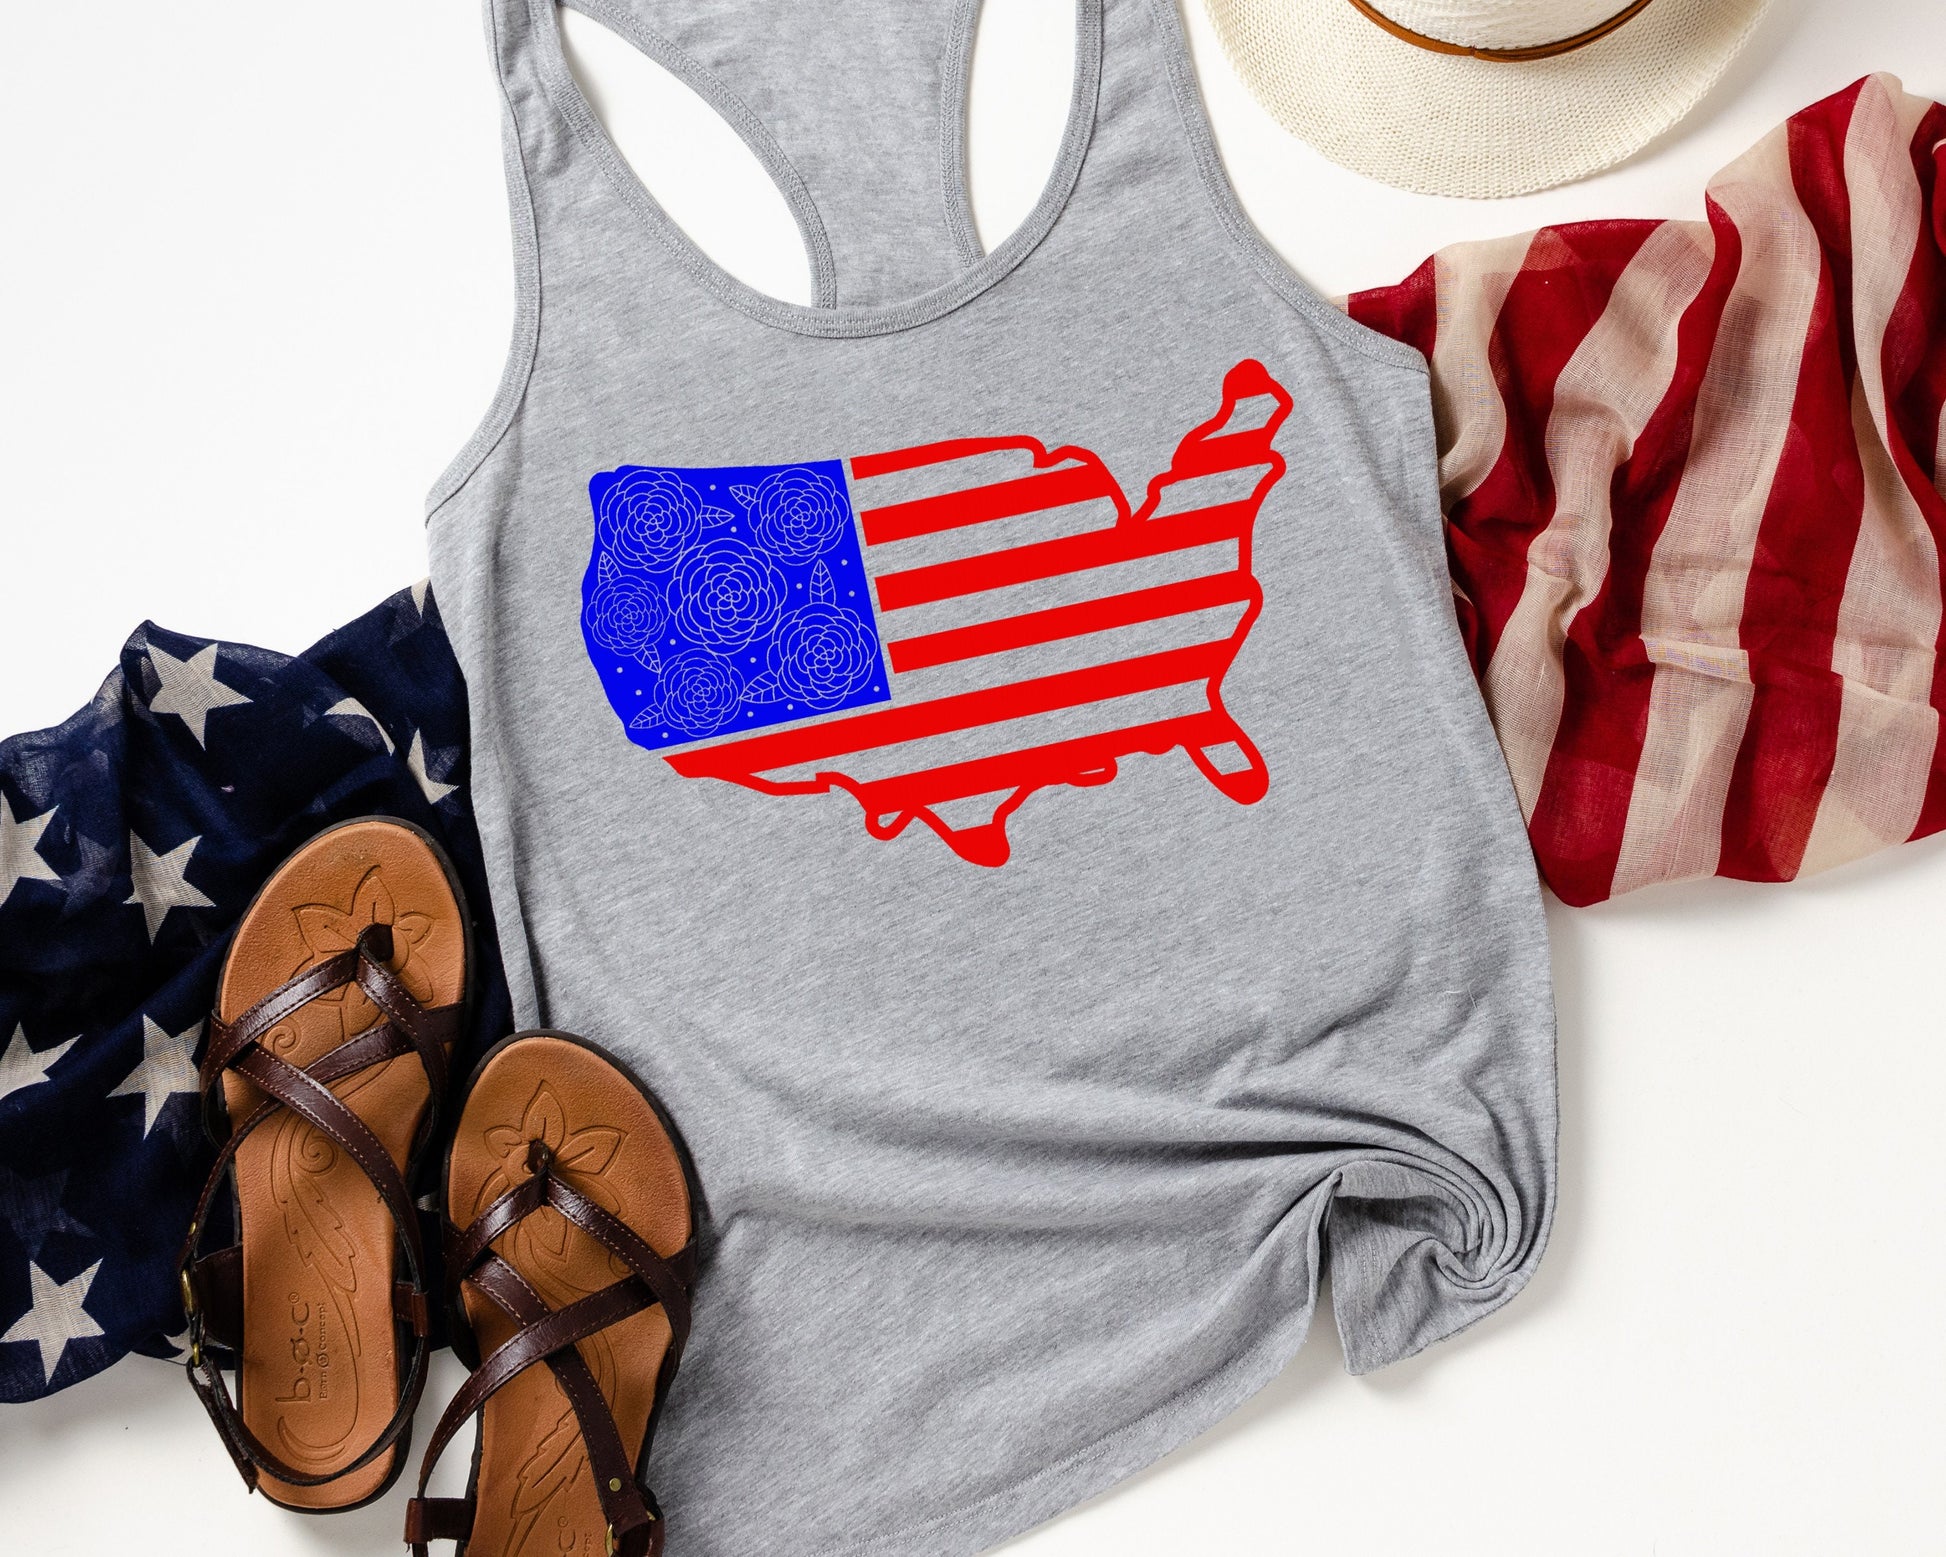 Floral USA racerback tank t-shirt - 4th of july tank top - patriotic tank top - fourth of july shirt - 4th of july shirt - merica tank